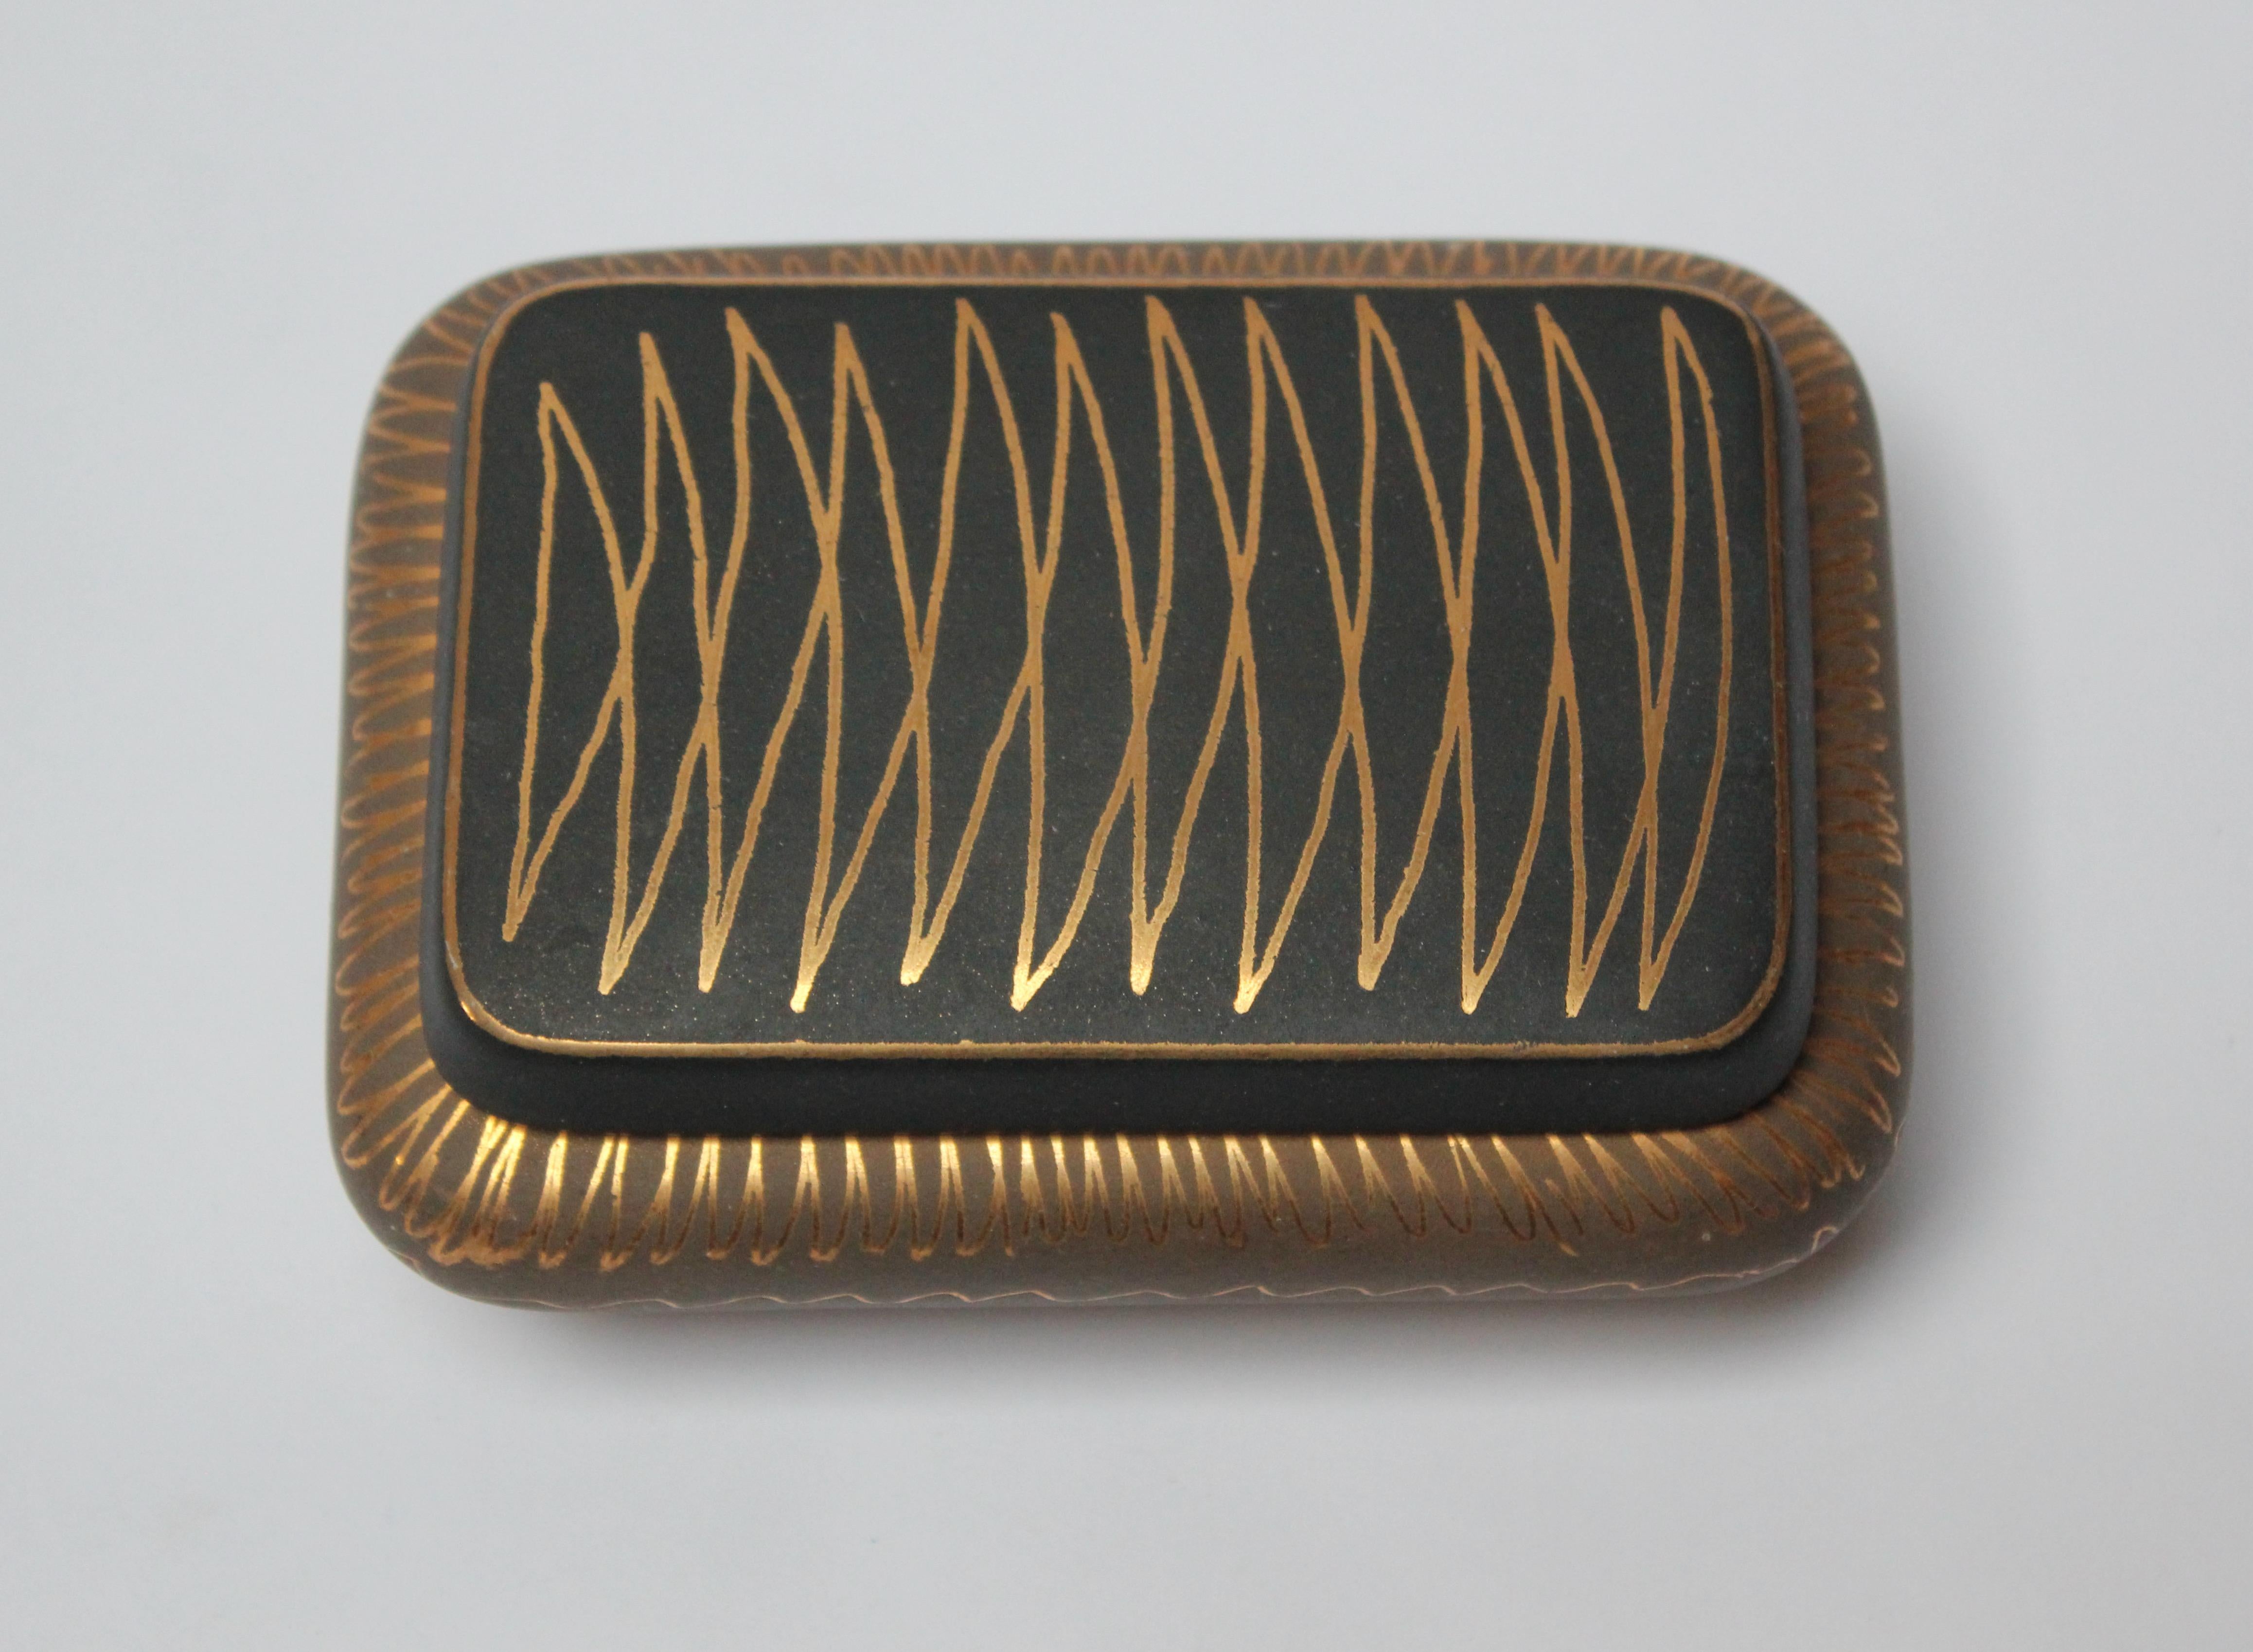 American Small Art Deco Black and Gold Ceramic Decorative Lidded Box by Waylande Gregory